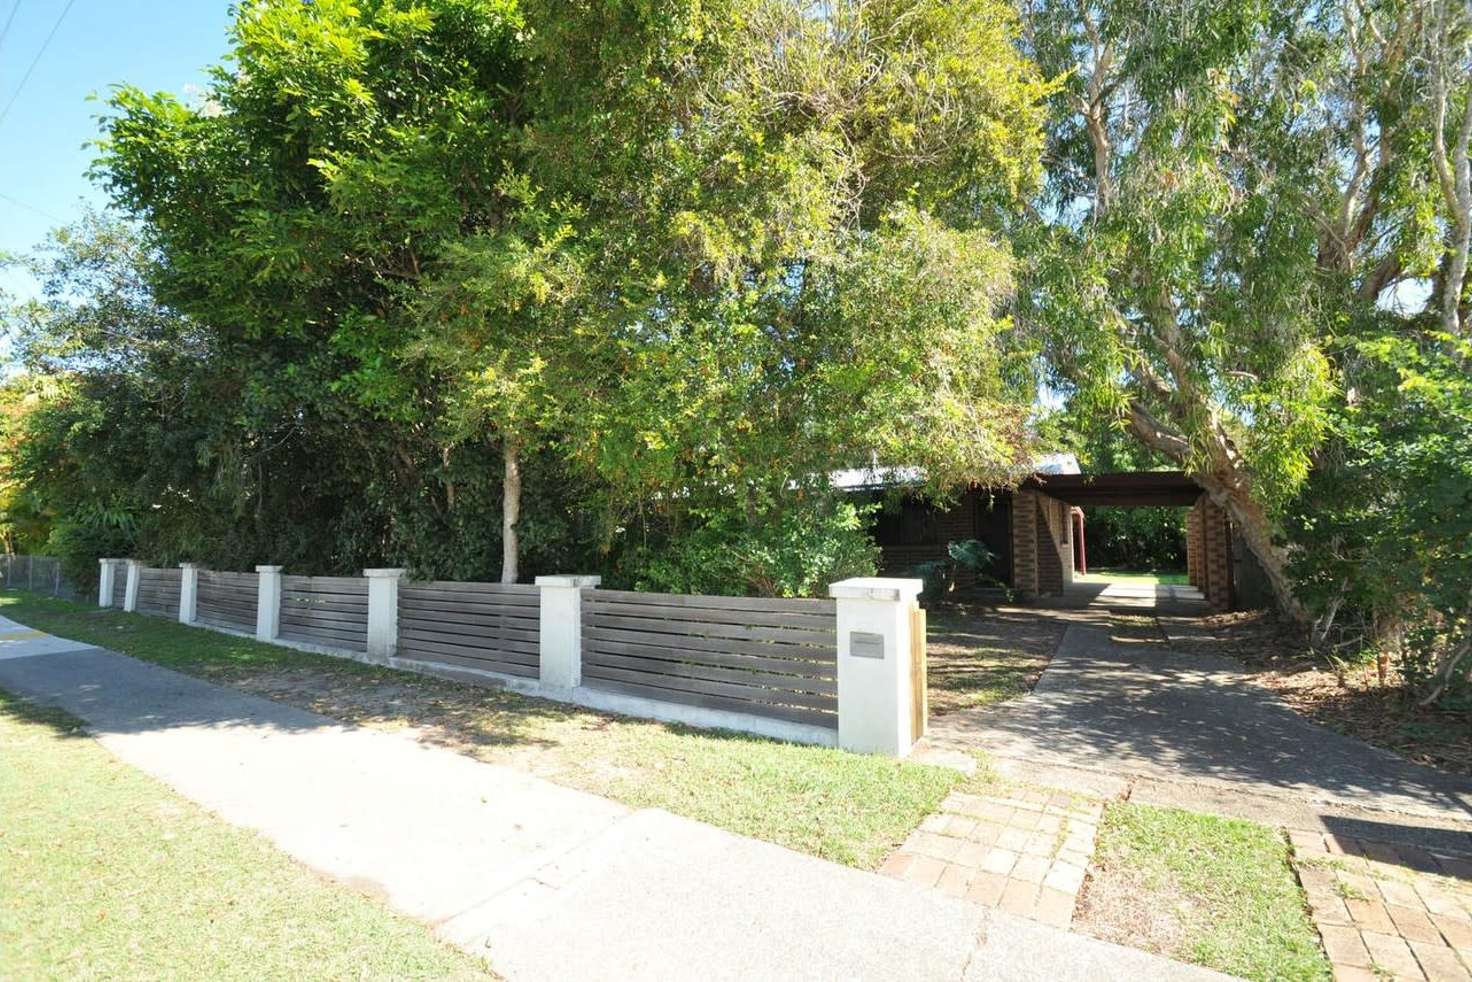 Main view of Homely house listing, 72 Station Road, Bethania QLD 4205